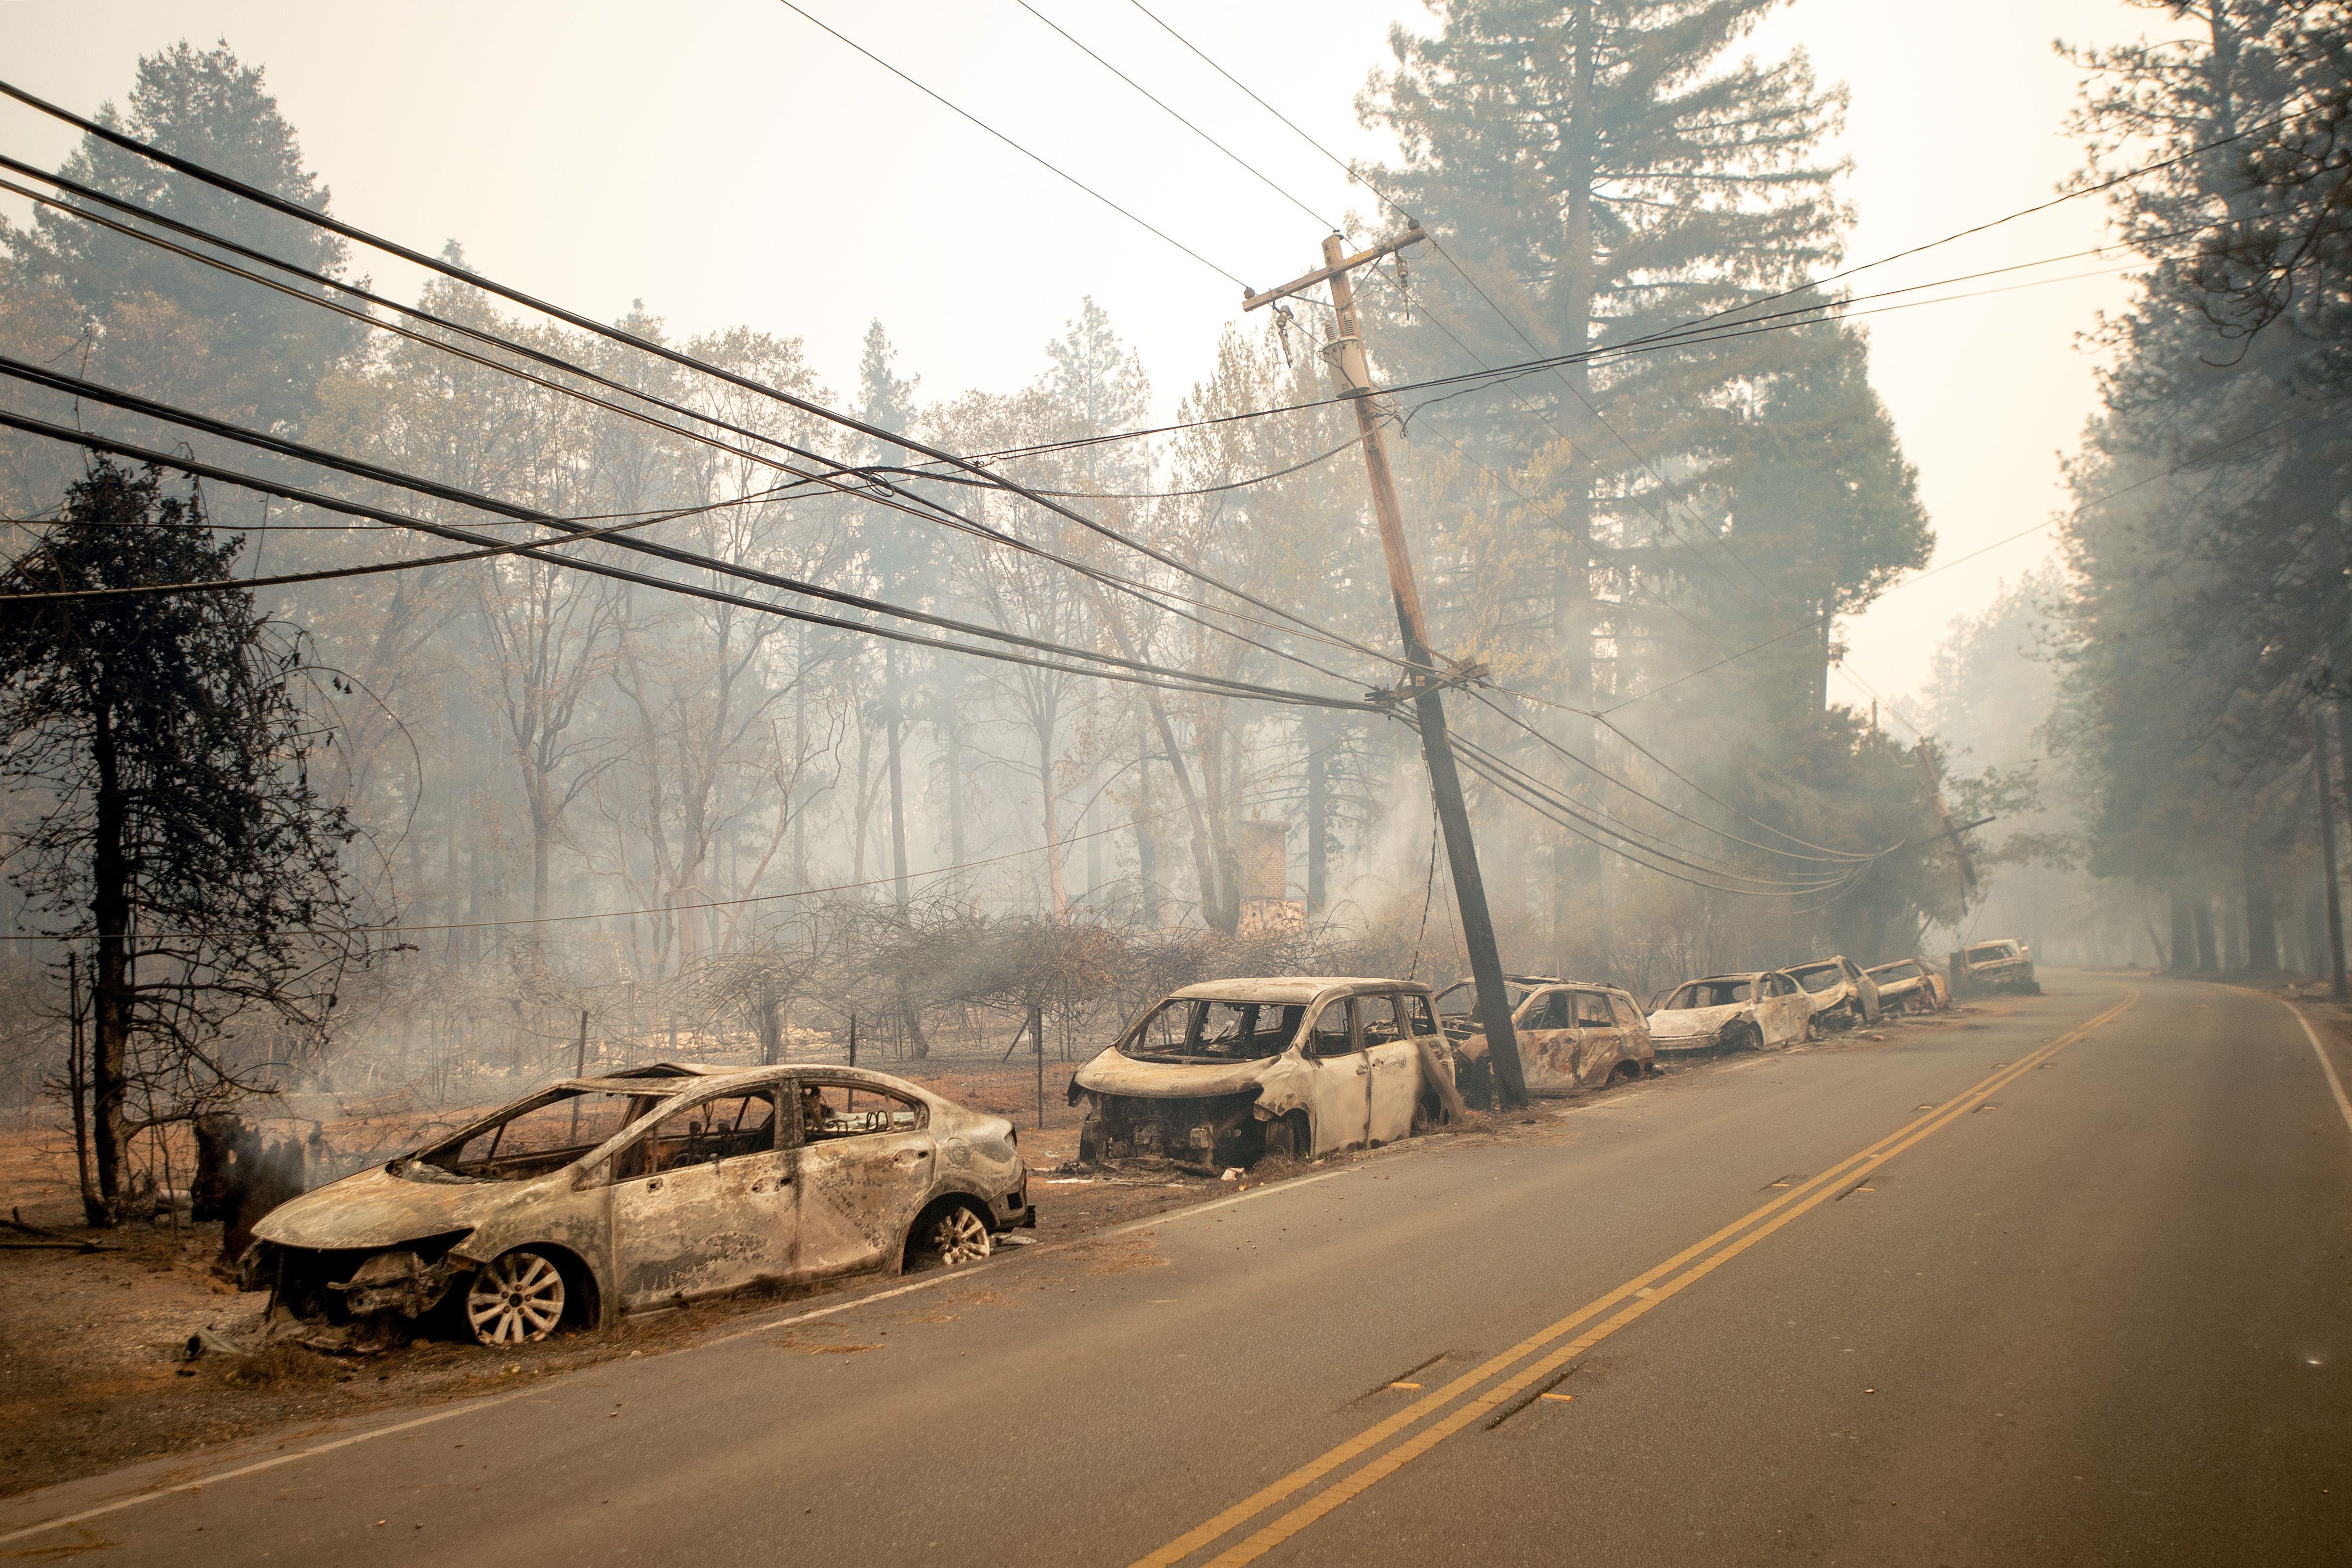 Abandoned and charred vehicles sit on the side of a road. An electrical pole leans dangerously. The air is hazy.